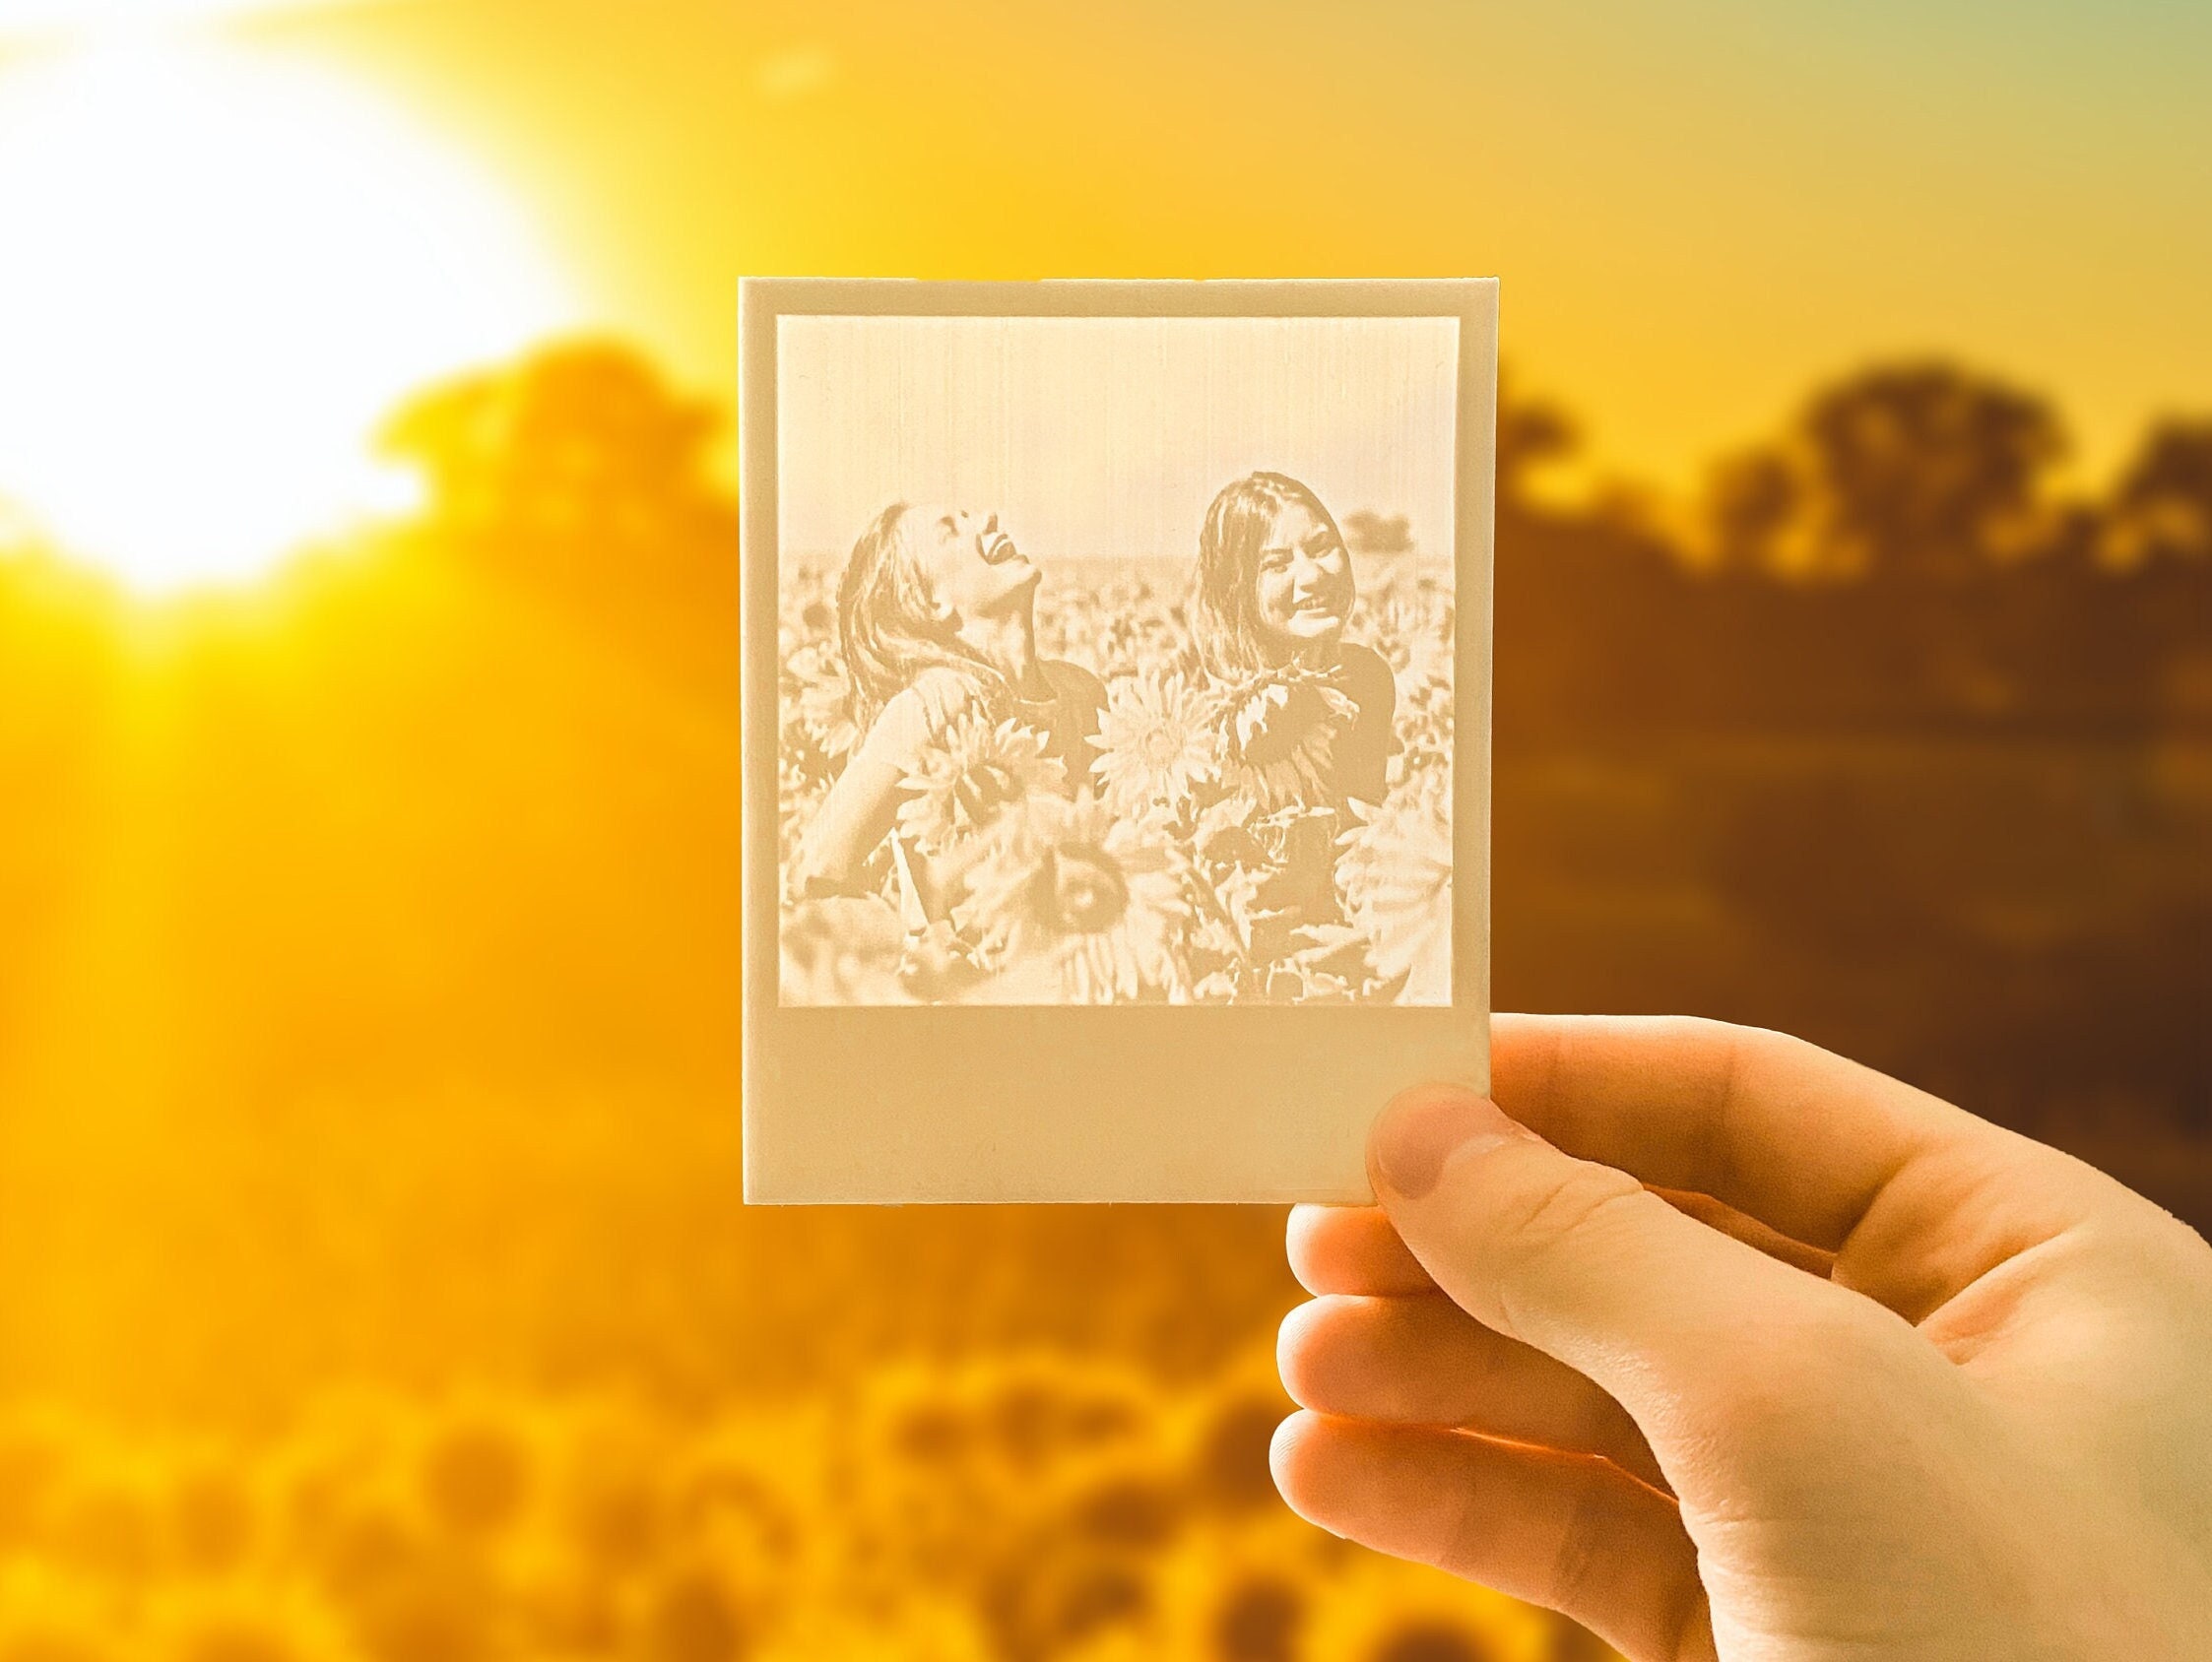 3D Printed Customizable Lithophane Light Picture Box Gift Great